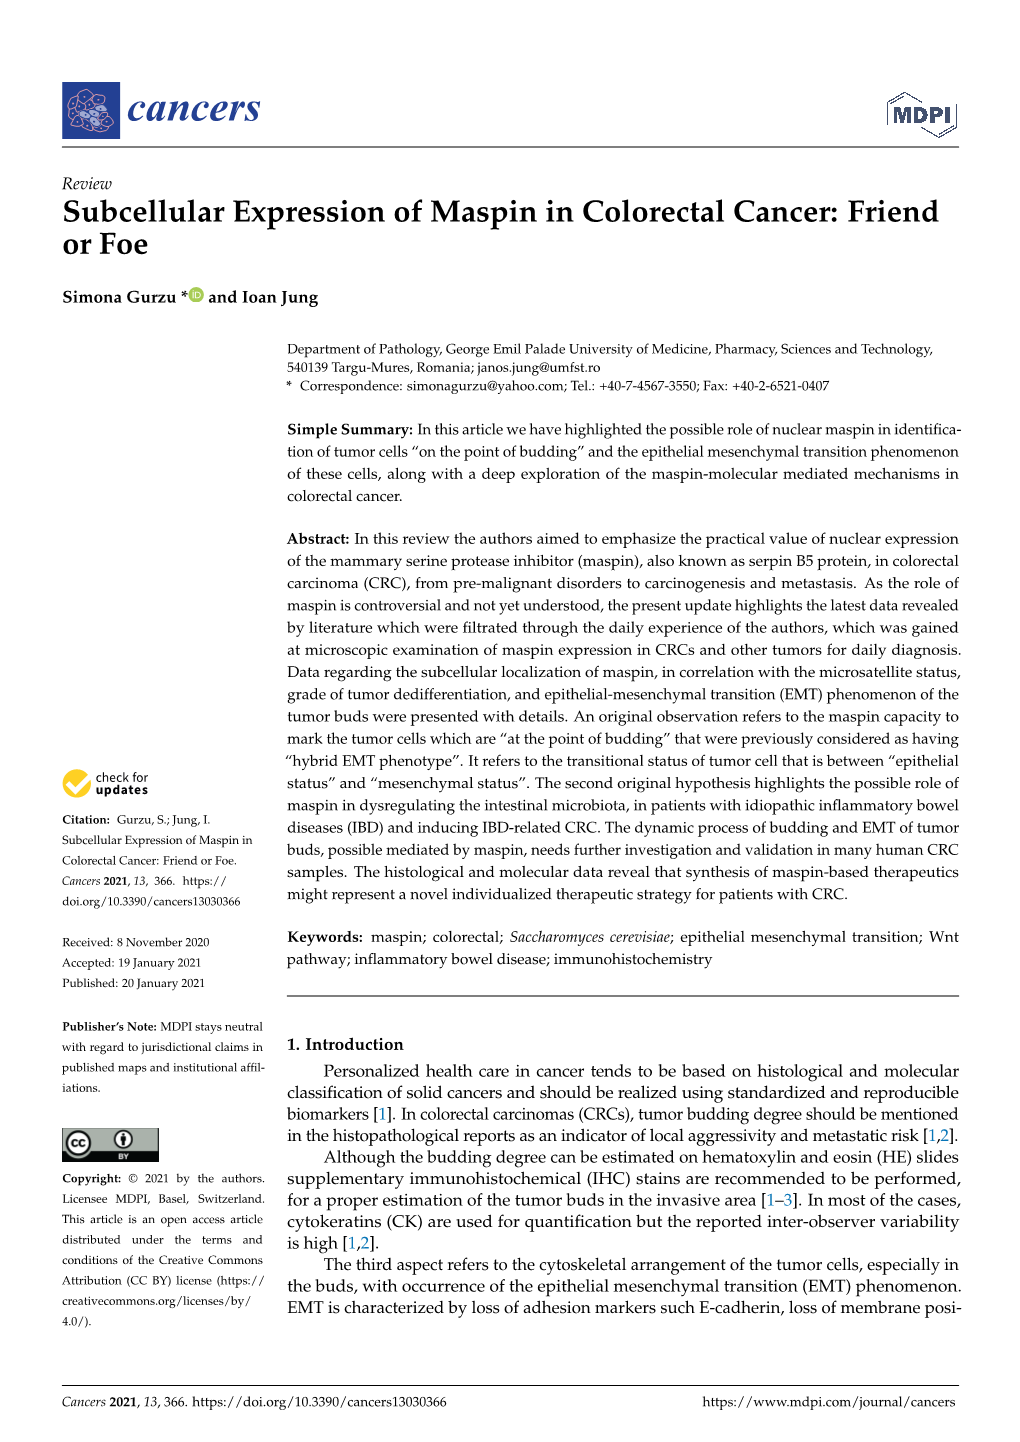 Subcellular Expression of Maspin in Colorectal Cancer: Friend Or Foe